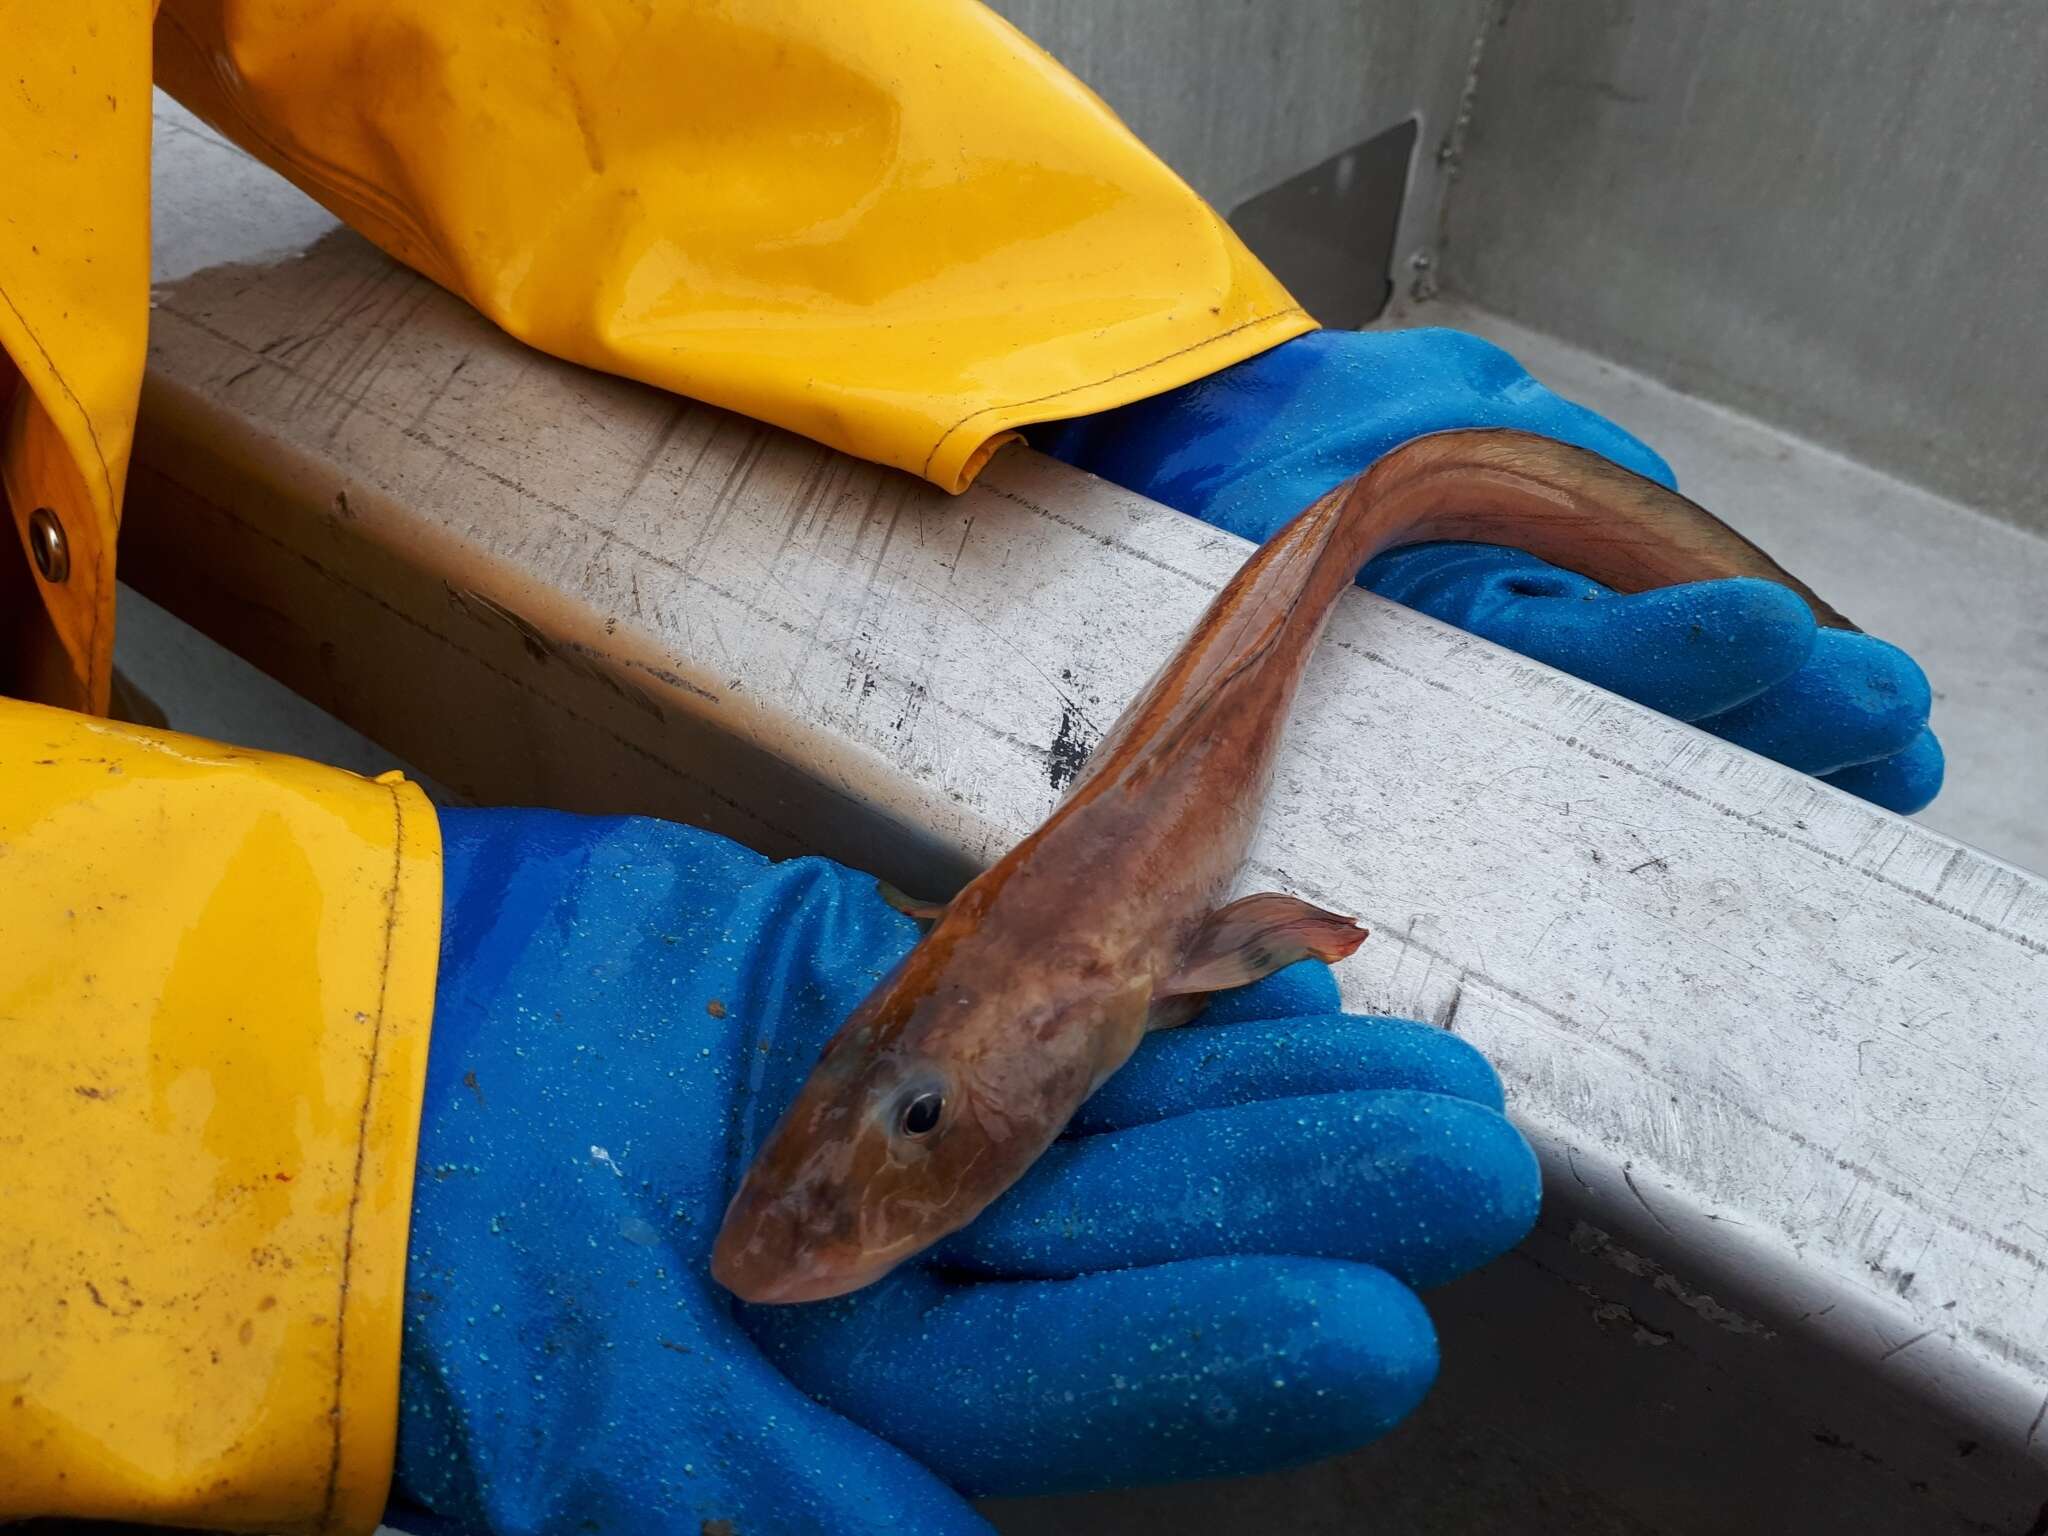 Image of Wattled Eelpout